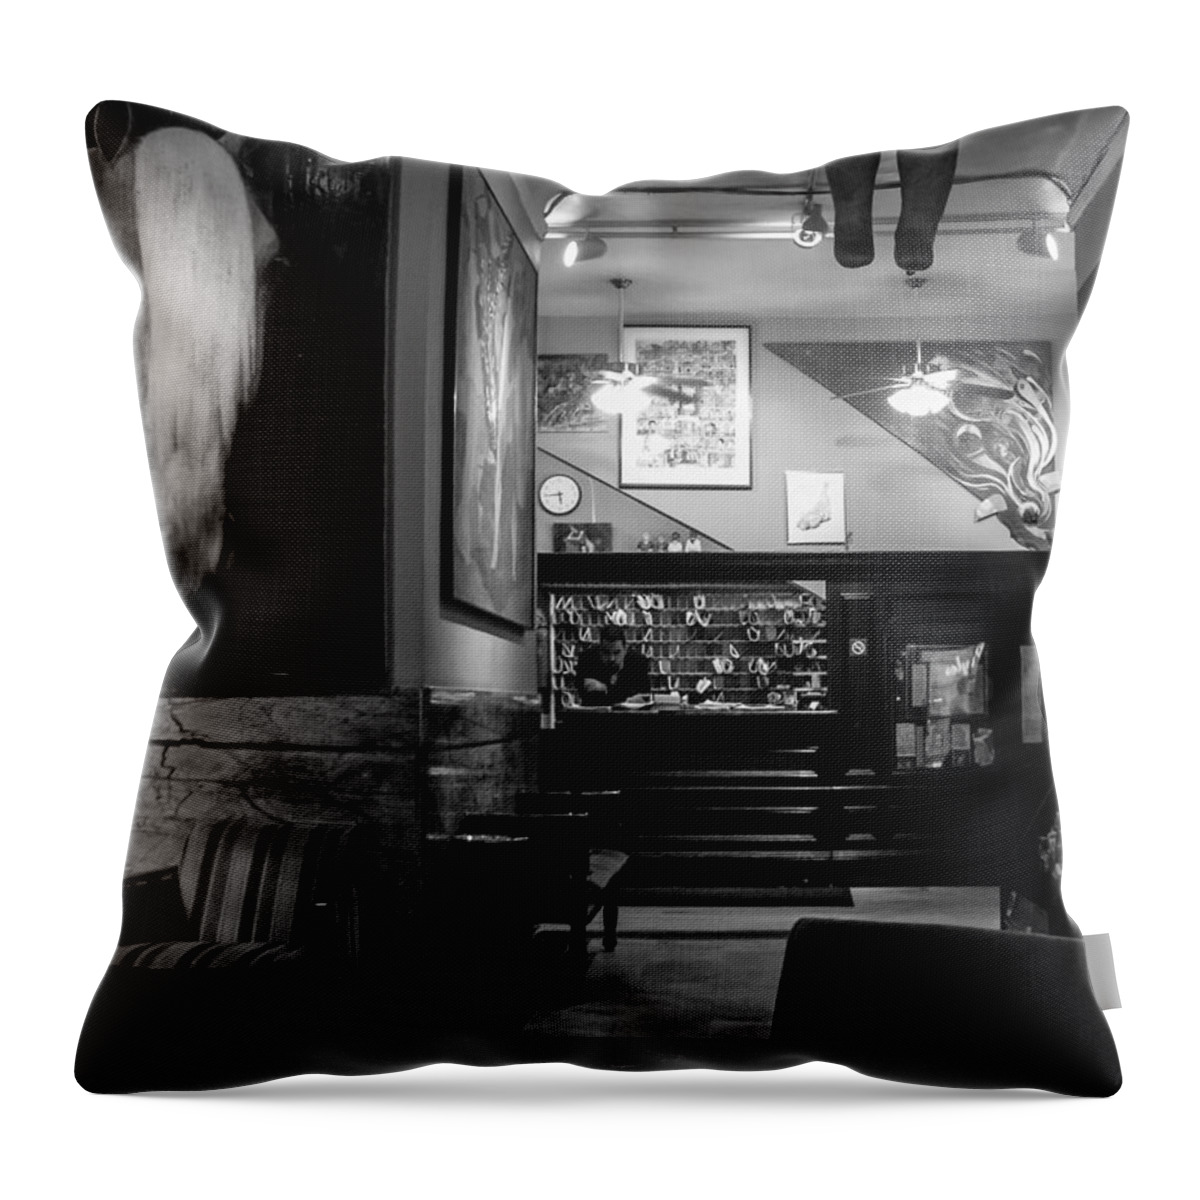 B&w Throw Pillow featuring the photograph Chelsea Hotel Night Clerk by Frank Winters